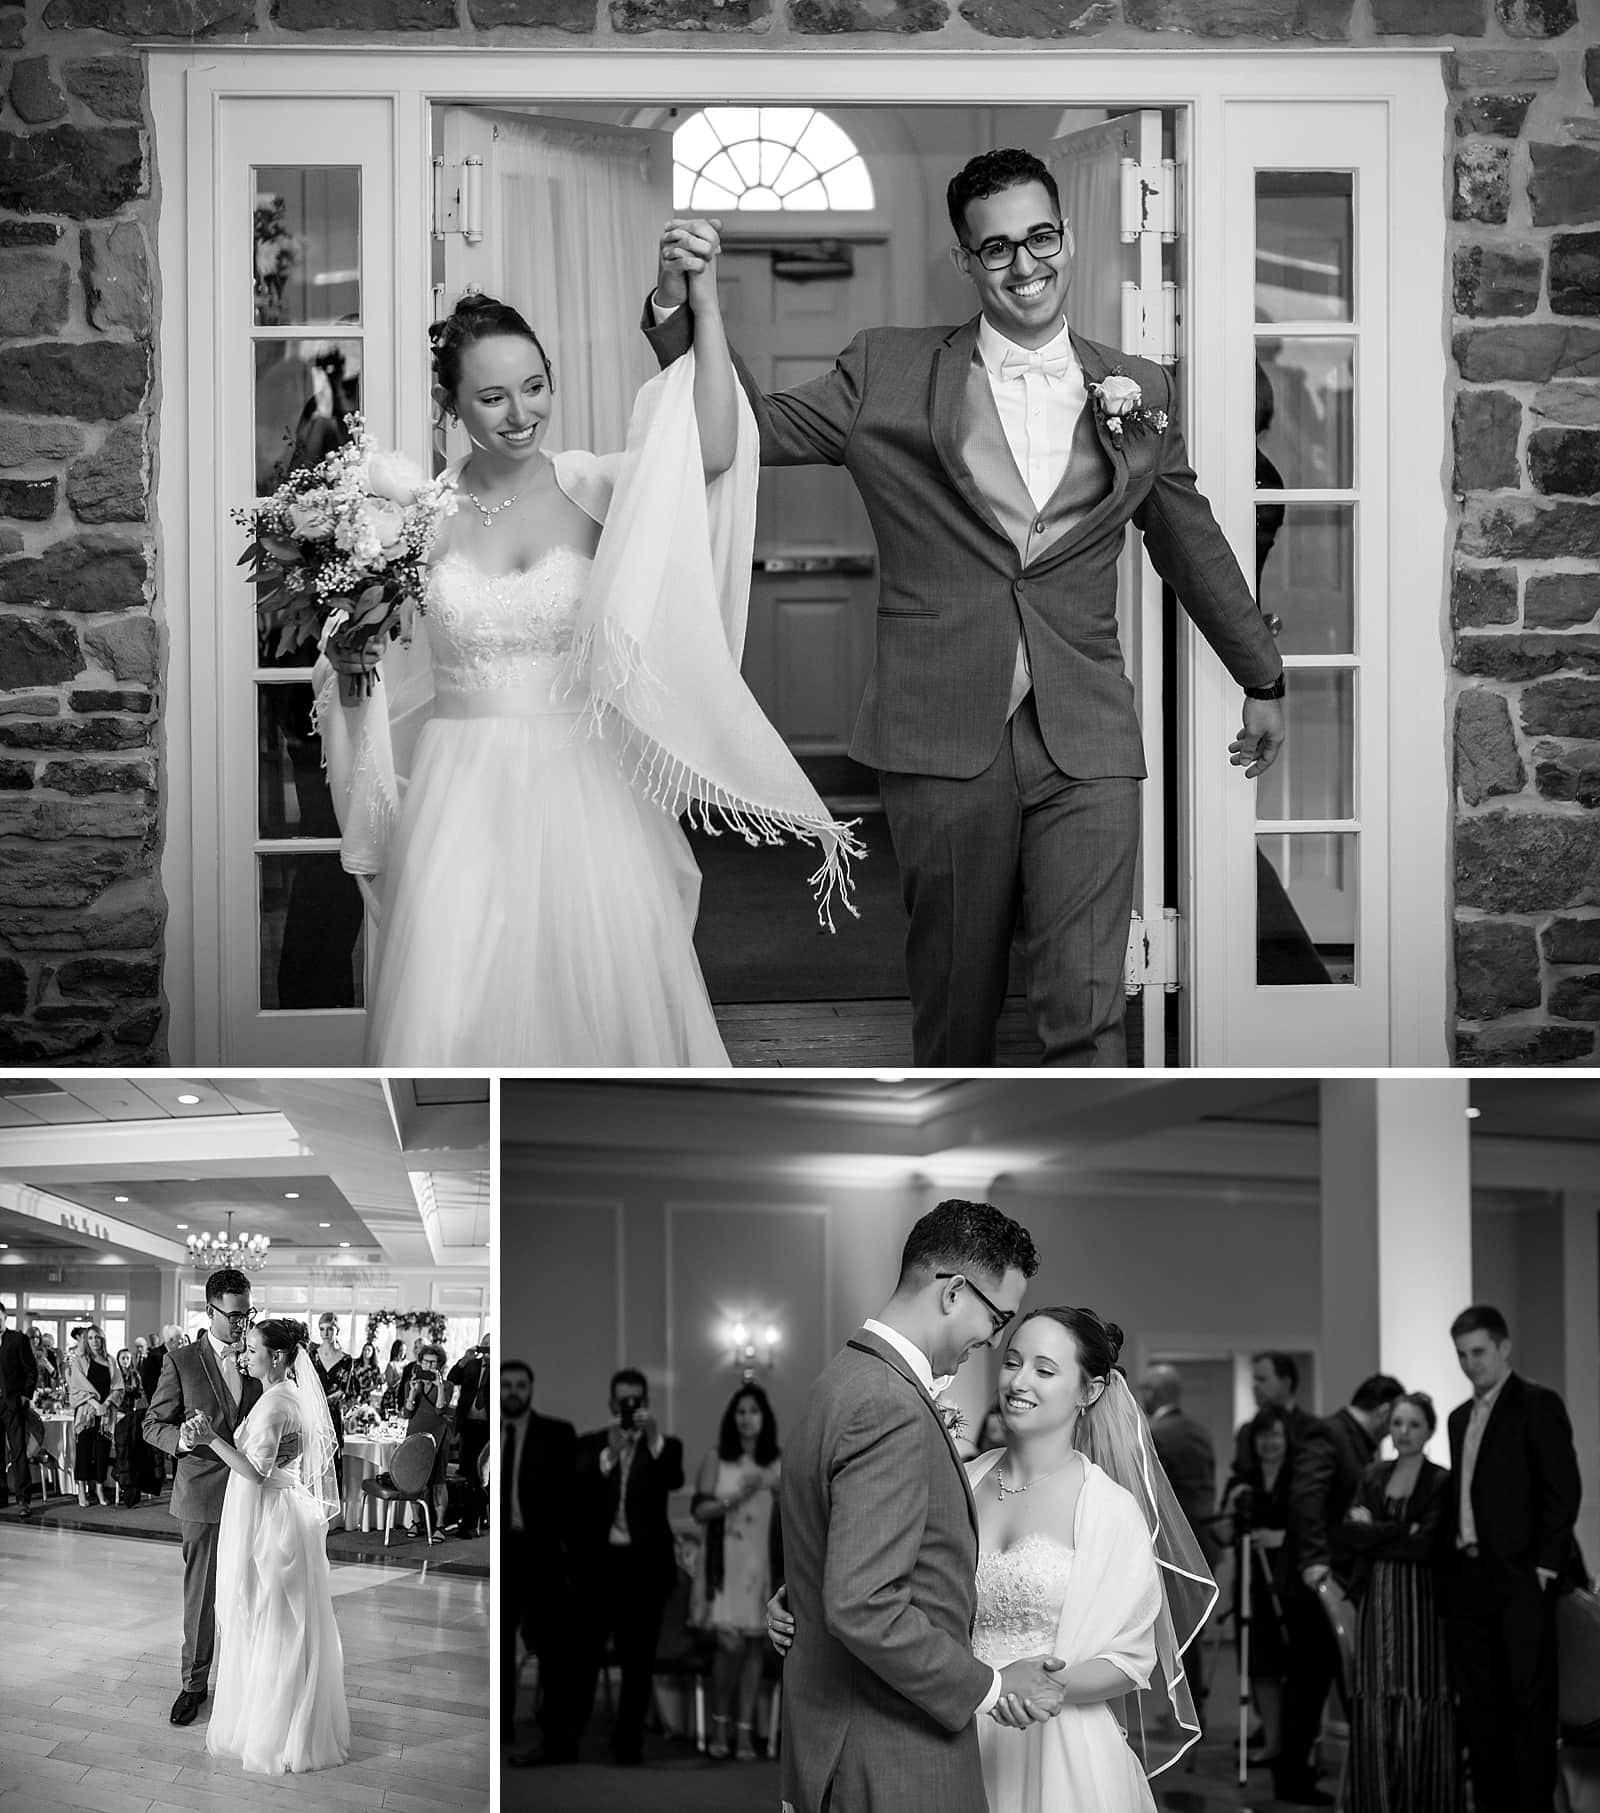 Husband and wife entrance at the reception, bride and groom first dance, black and white wedding photography, The Manor House at Commonwealth wedding